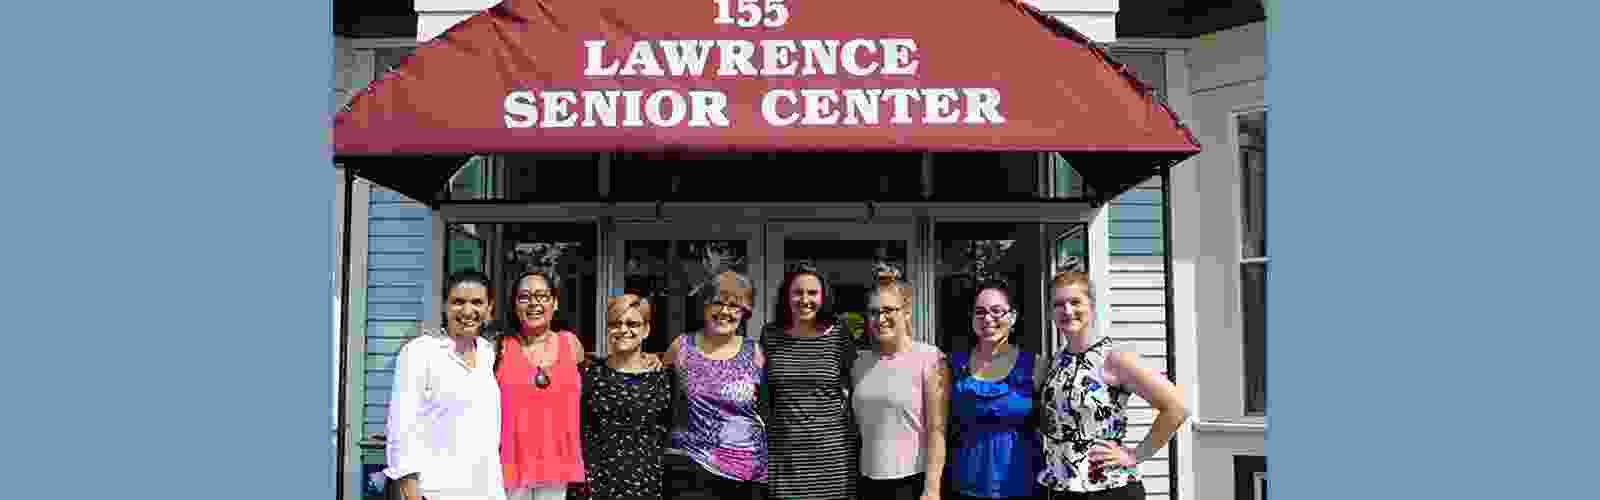 Our collaborators from UMASS Lowell and Senior Center in Lawrence, MA